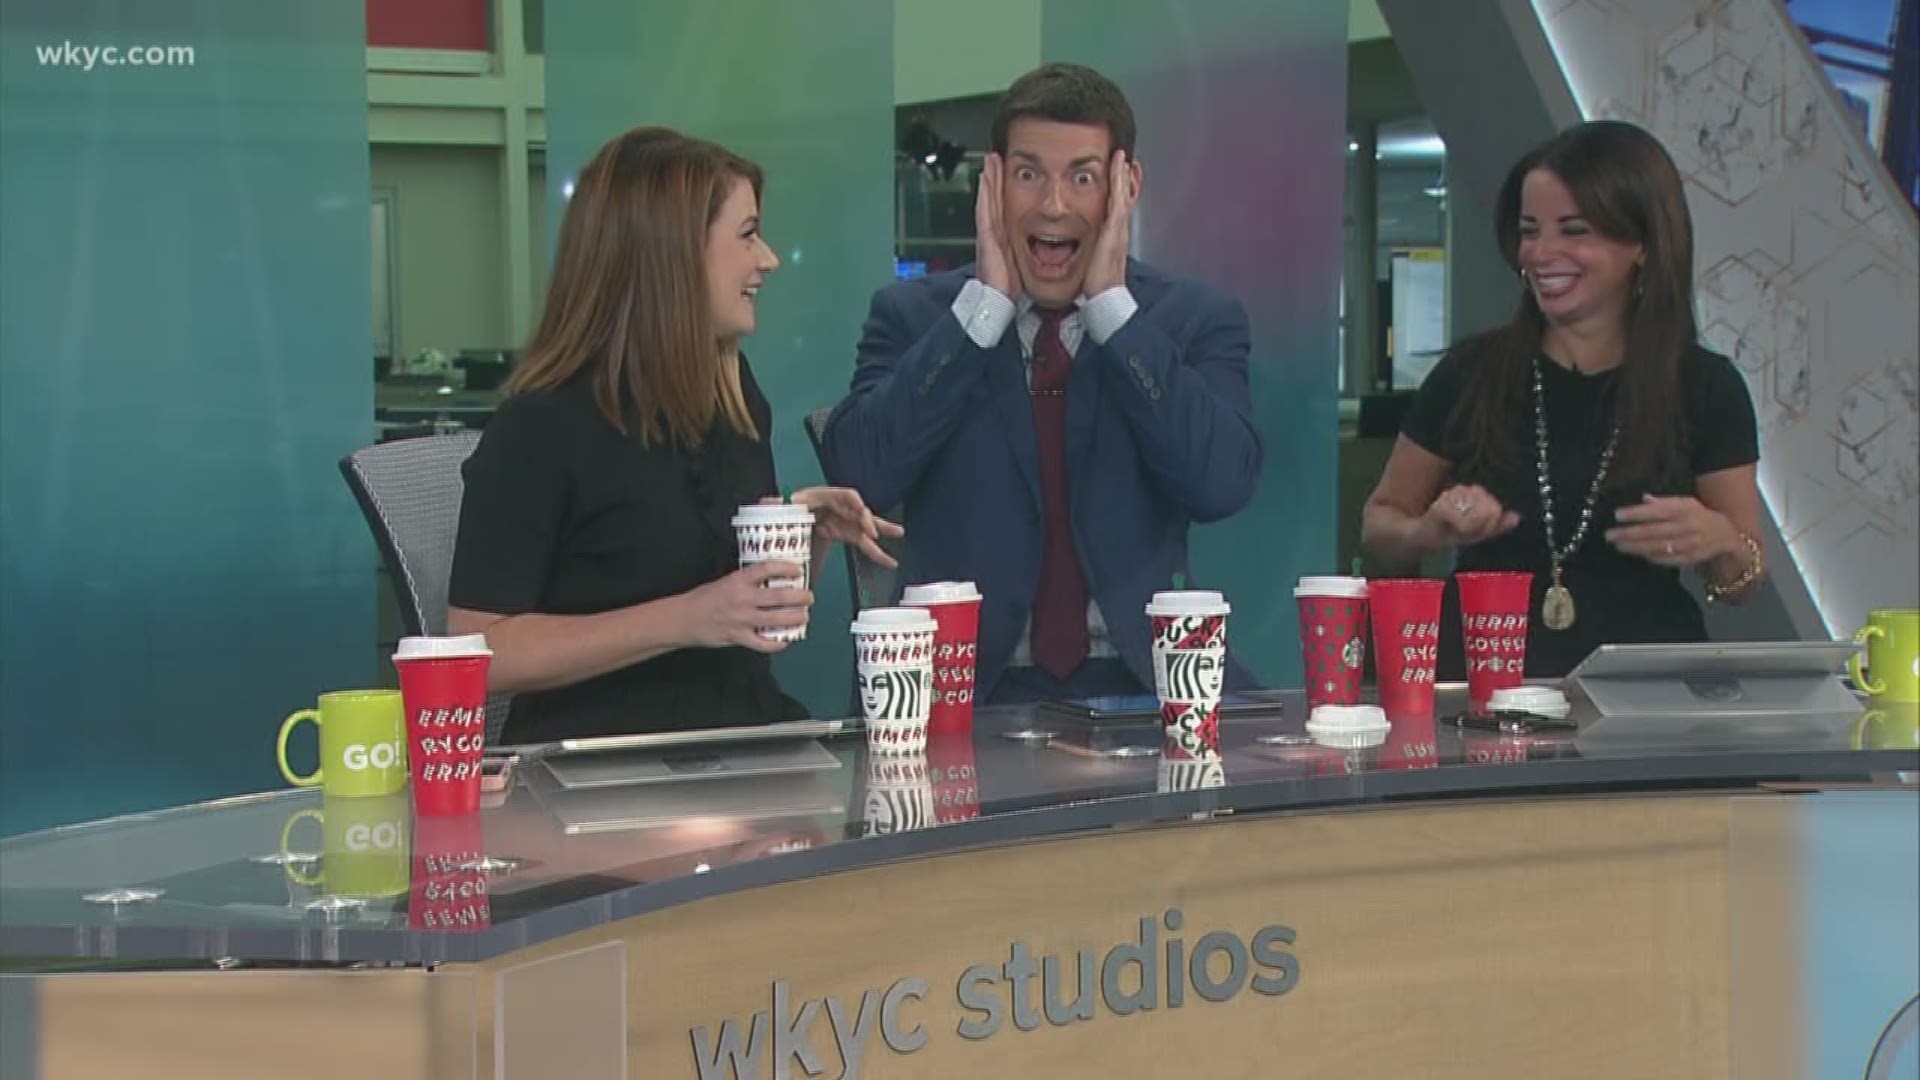 Nov. 7, 2019: As Starbucks released their new holiday cups for 2019, Dave Chudowsky decided to give their coffee a taste.